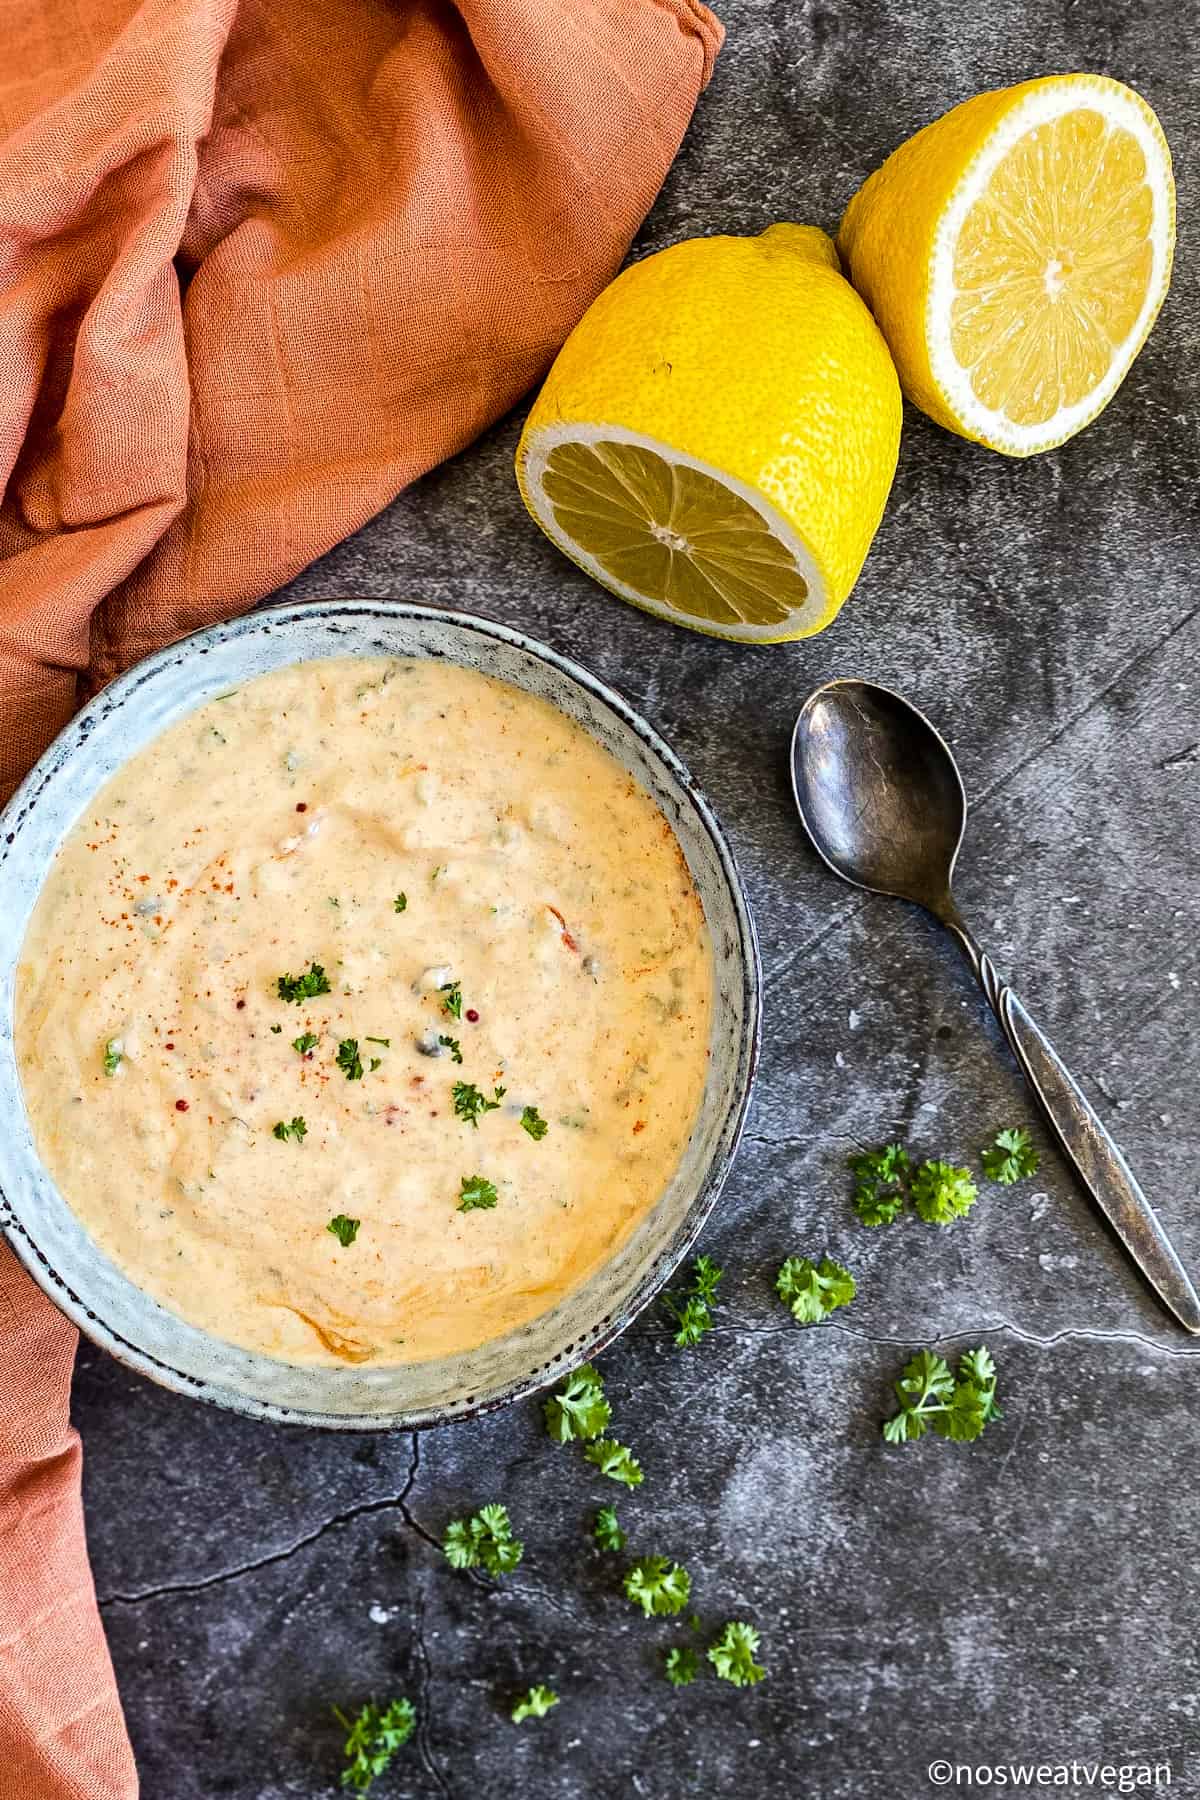 Vegan remoulade sauce in bowl with lemon, parsley, and a spoon.